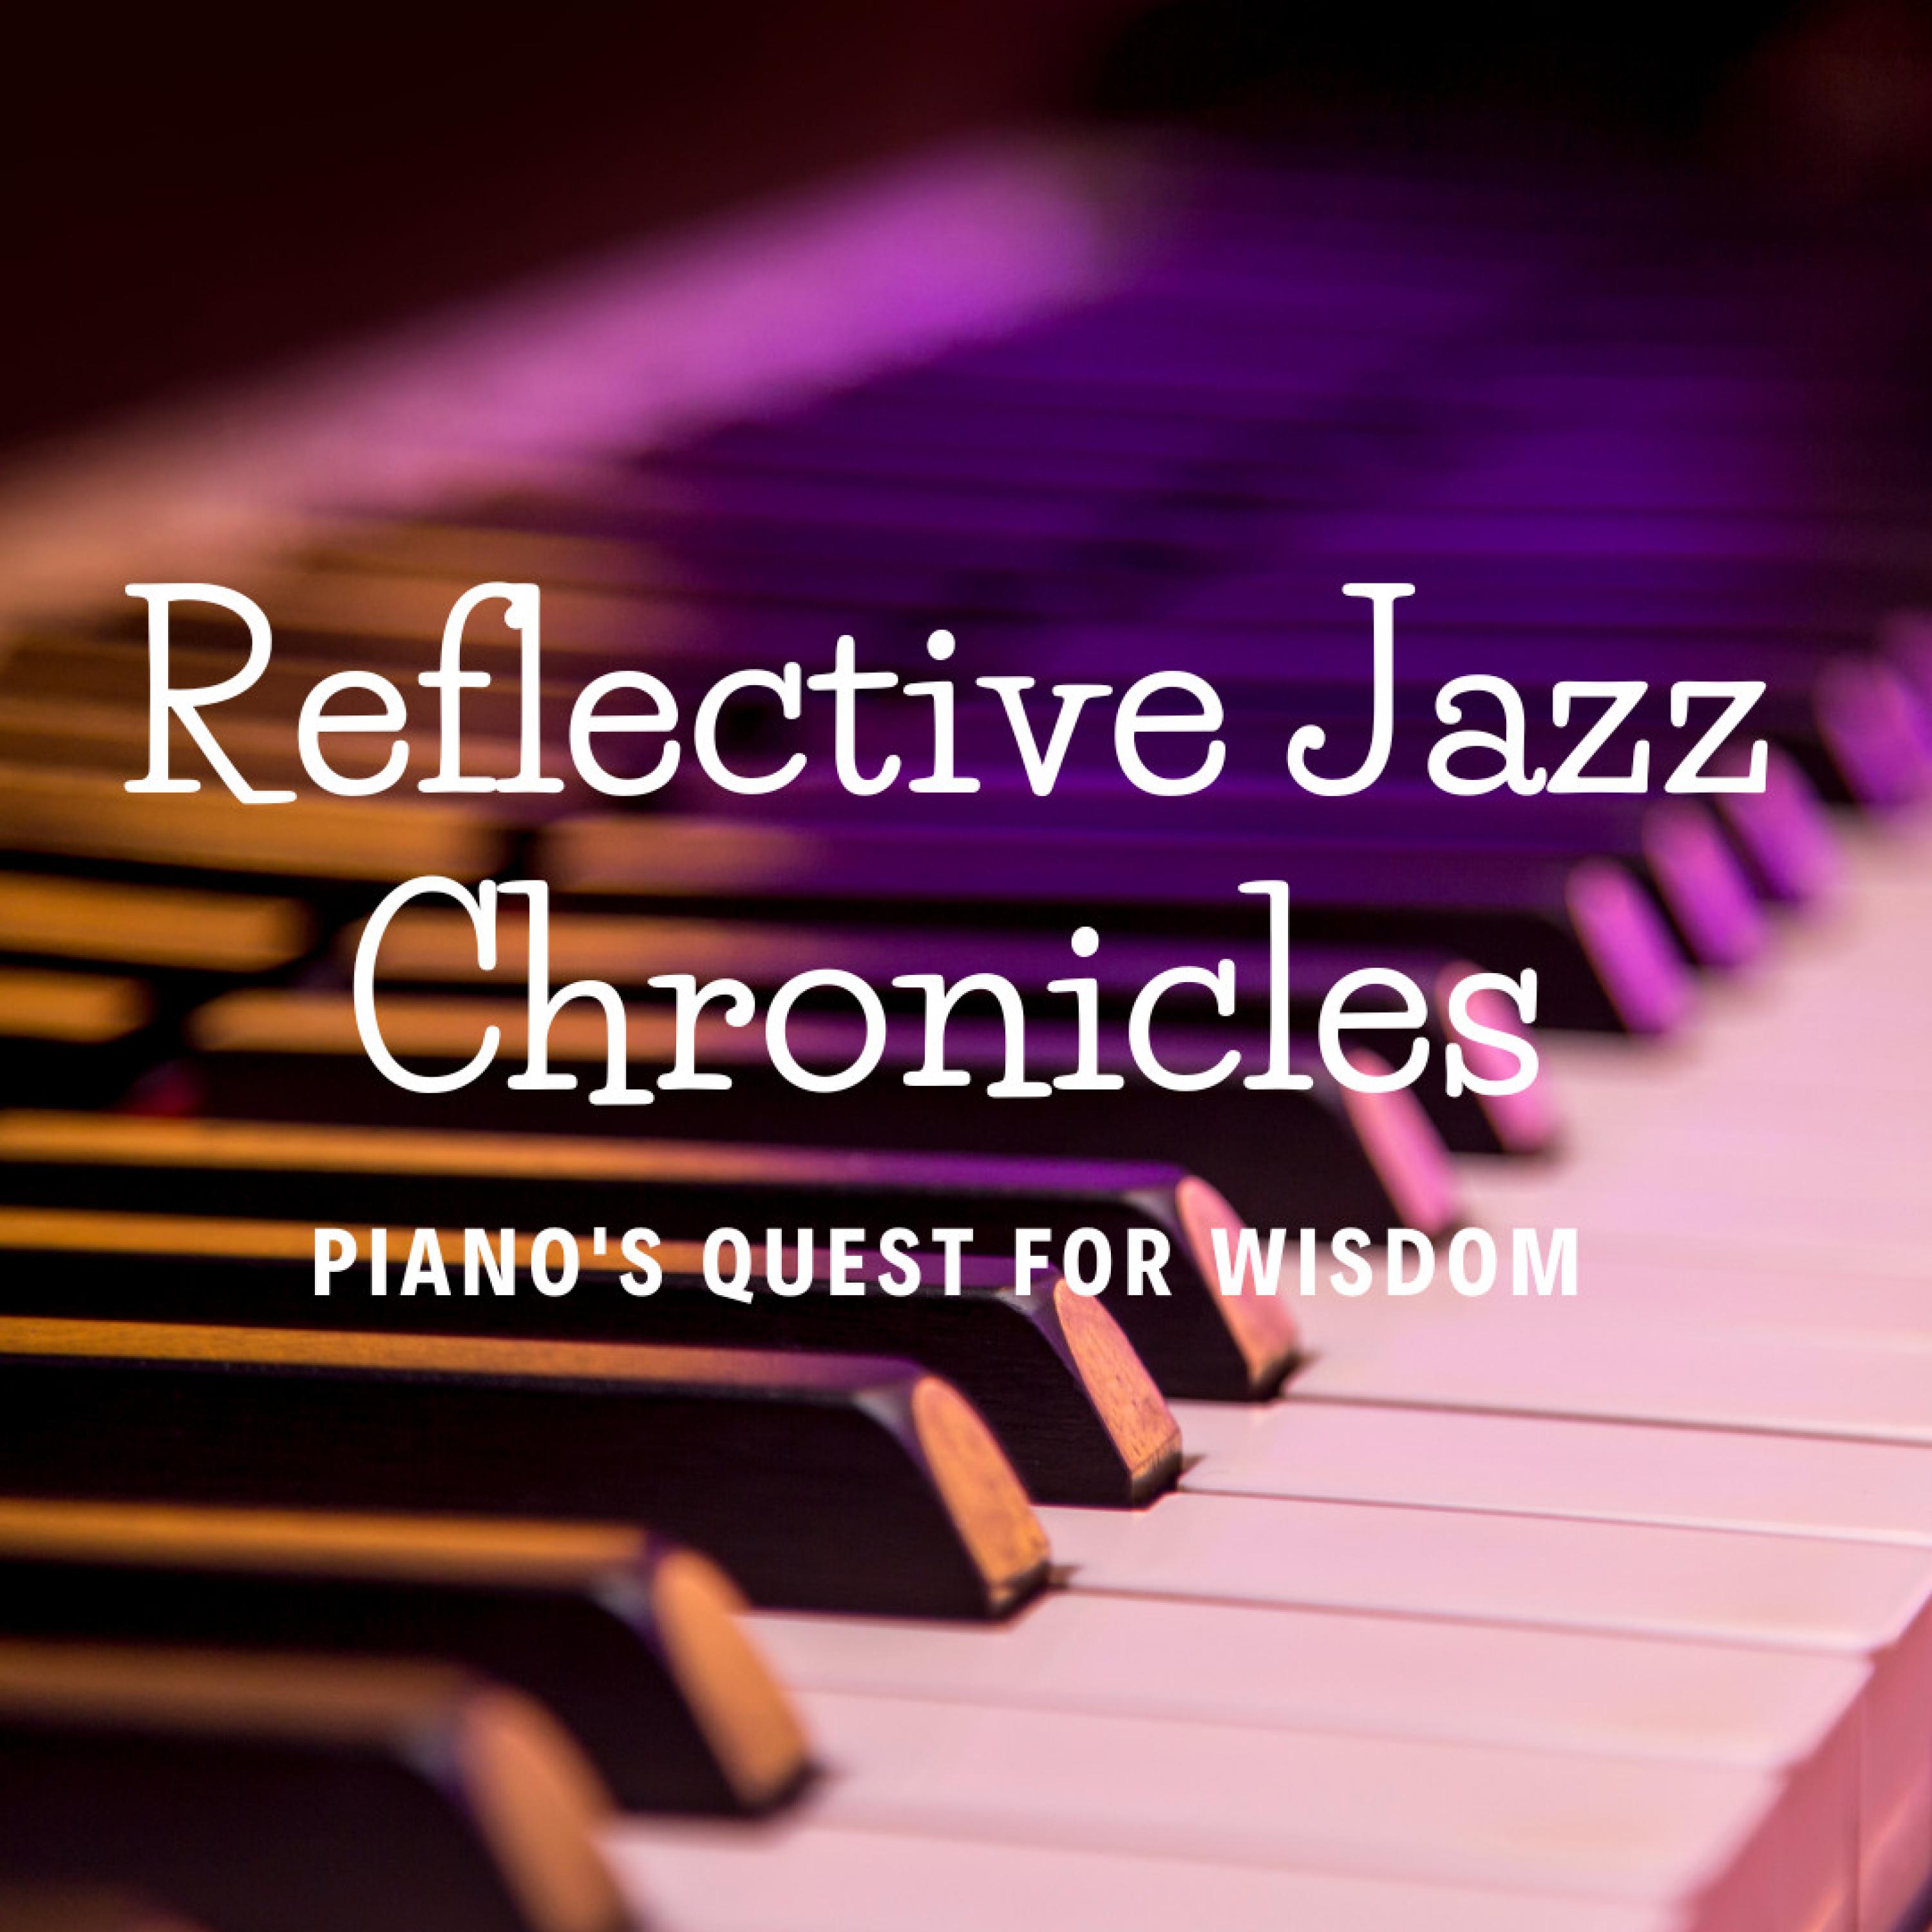 Early Morning Smooth Jazz Playlist - Elevated Reflective Resonance: Jazzed Chronicles of Piano Insight